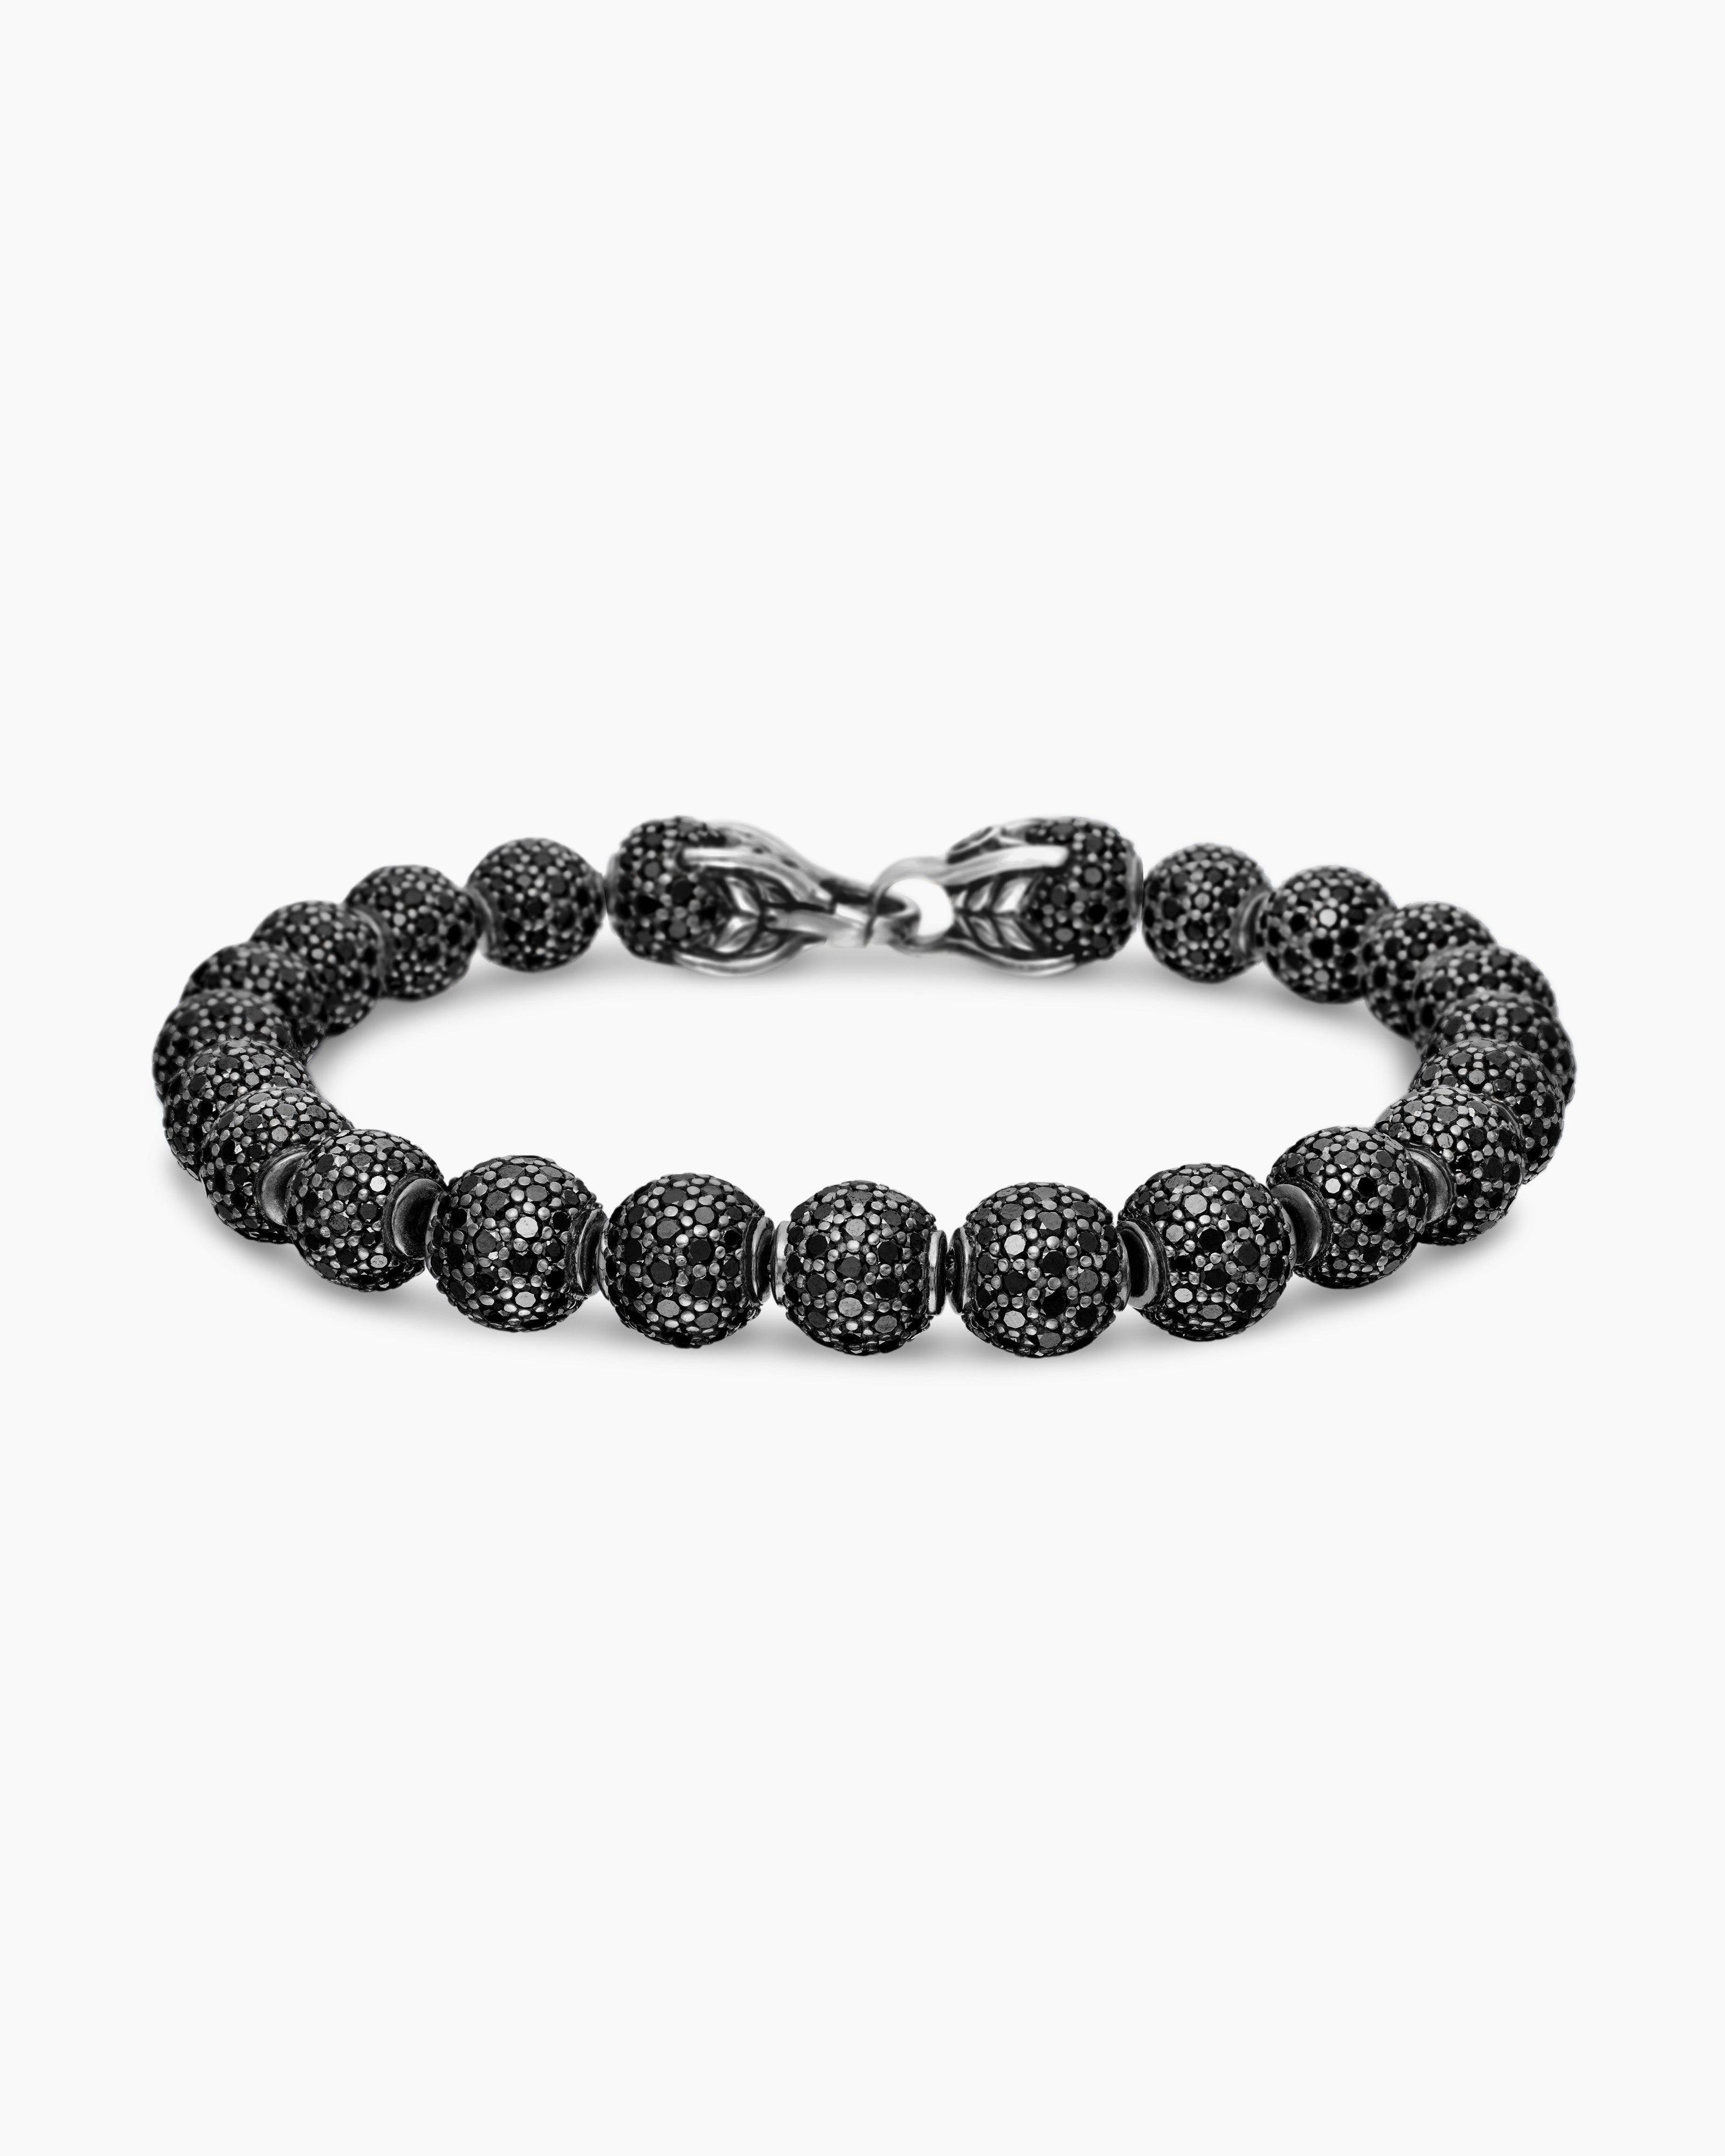 1/10 CT. T.W. Black Diamond Beaded Hearts Link Line Bracelet in Sterling  Silver and Black Resin - 7.25